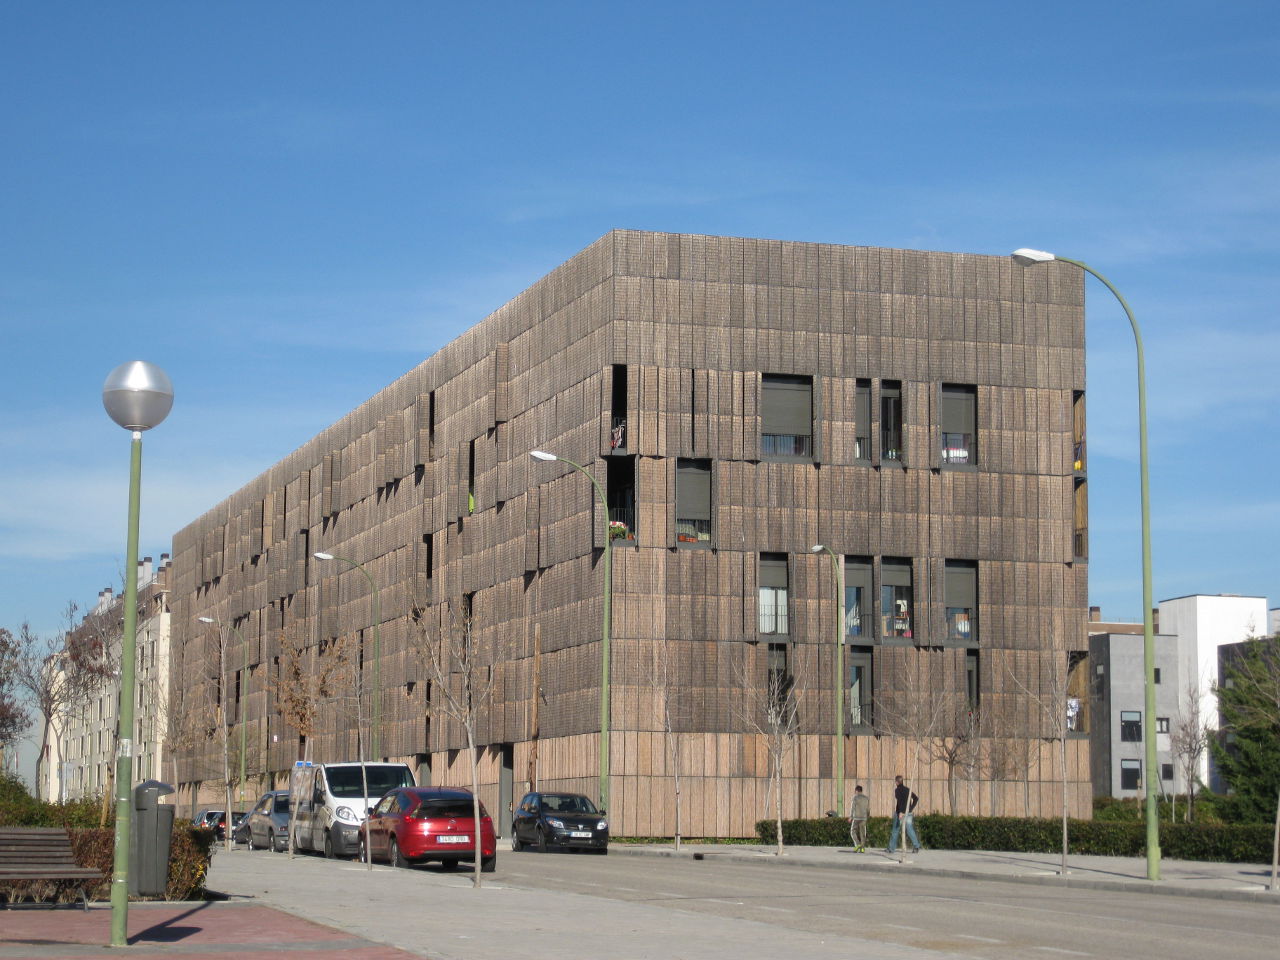 Exterior of the bamboo Carabanchel Social Housing by Foreign Office Architects (FOA)